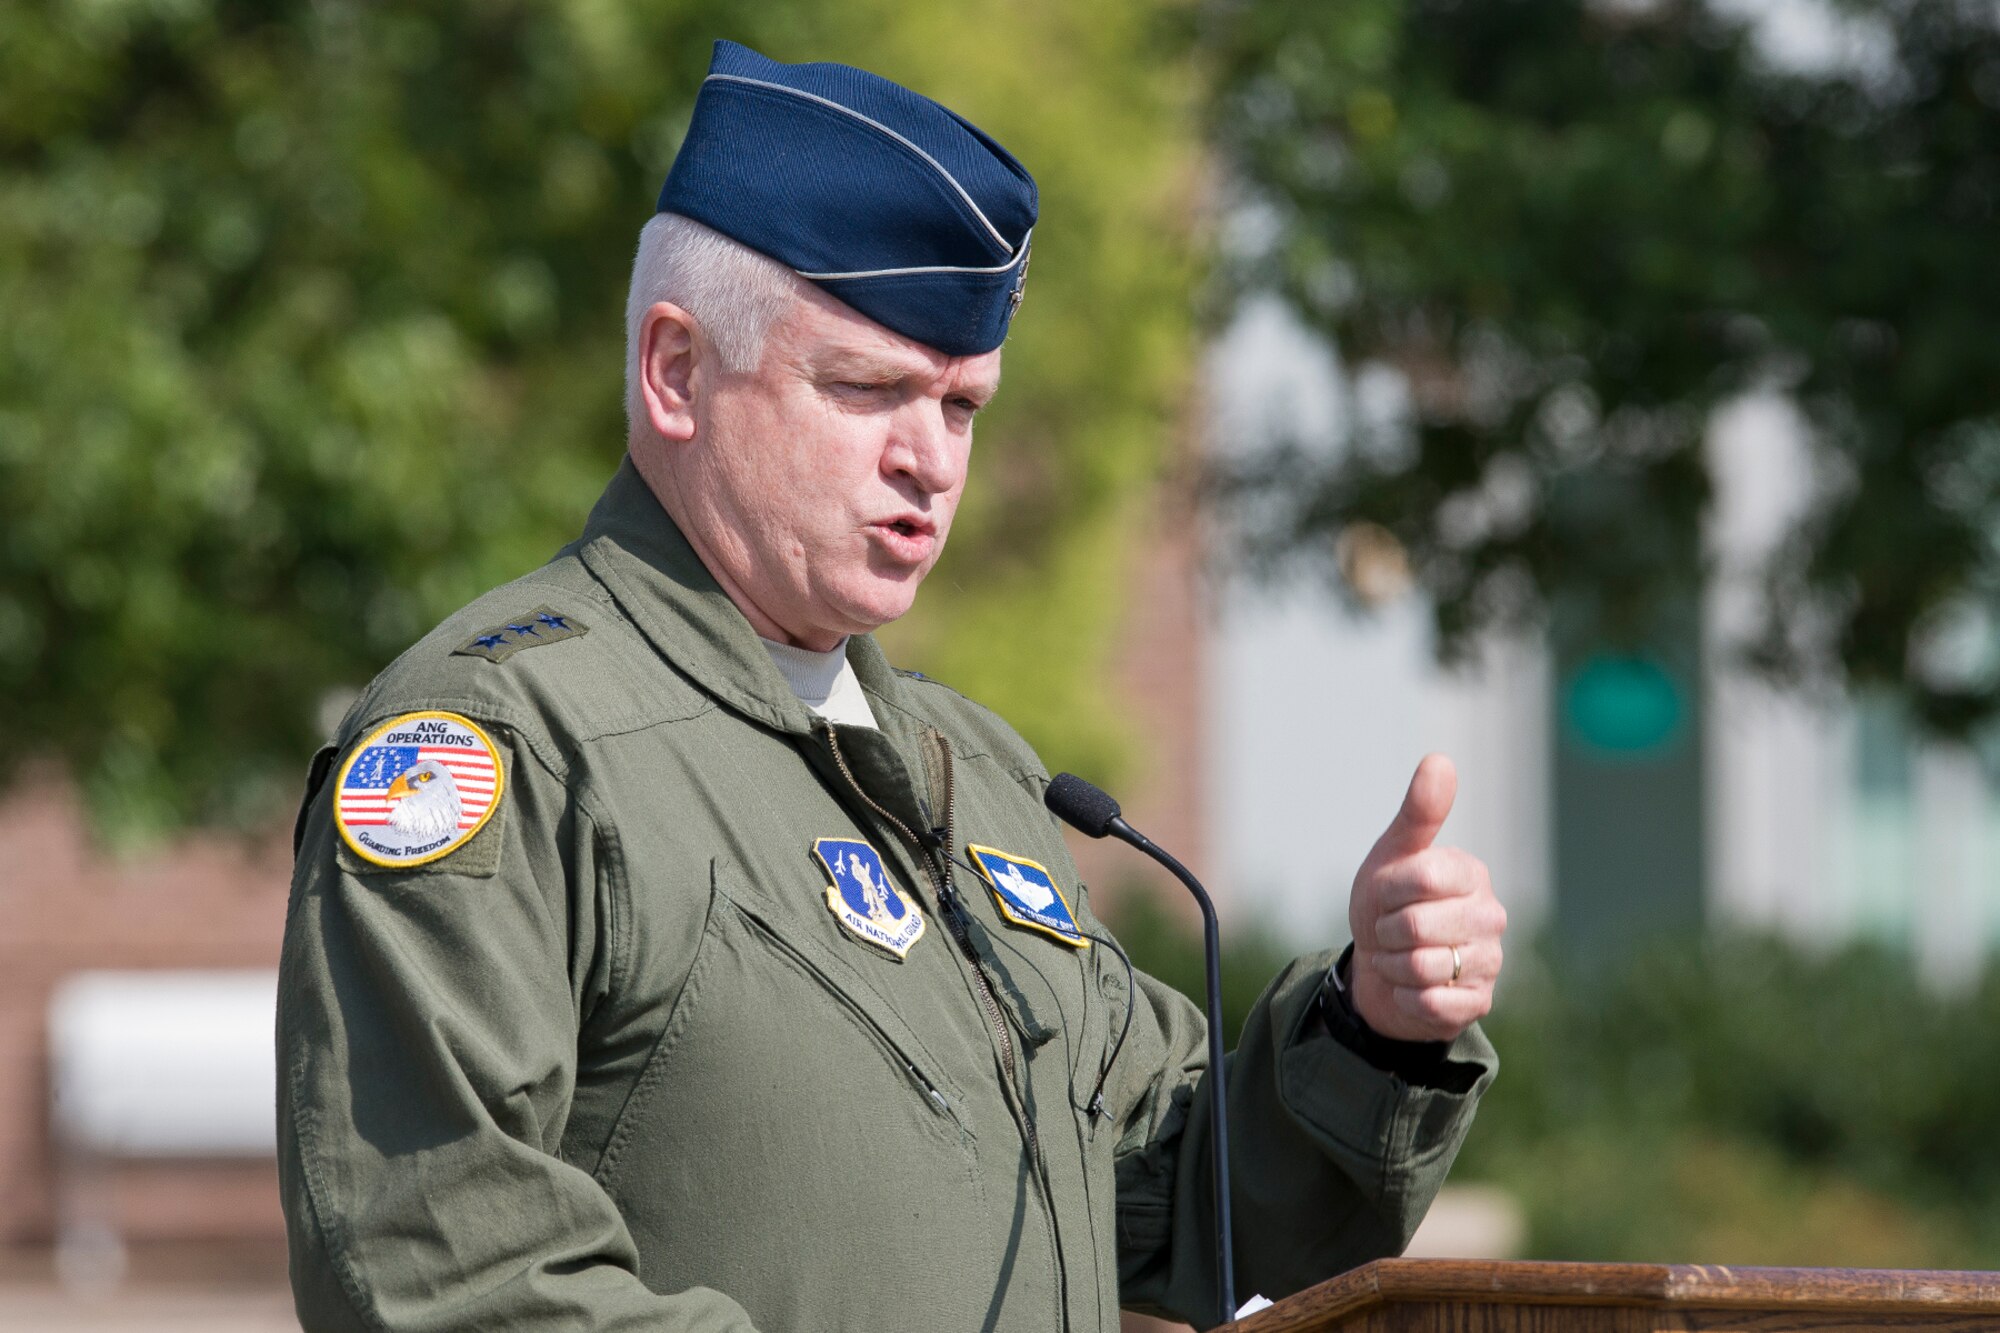 Lt. Gen. L. Scott Rice, director of the Air National Guard, gives opening remarks during an F-100 Super Sabre static display dedication ceremony, September 13, 2016. The aircraft is dedicated to ANG members killed, missing in action or wounded in the Vietnam War, and to the career of retired Maj. Gen. Donald W. Shepperd, who served as director of the ANG from 1994 to 1998 and flew 247 combat missions in Vietnam. (U.S. Air National Guard photo by Master Sgt. Marvin R. Preston)